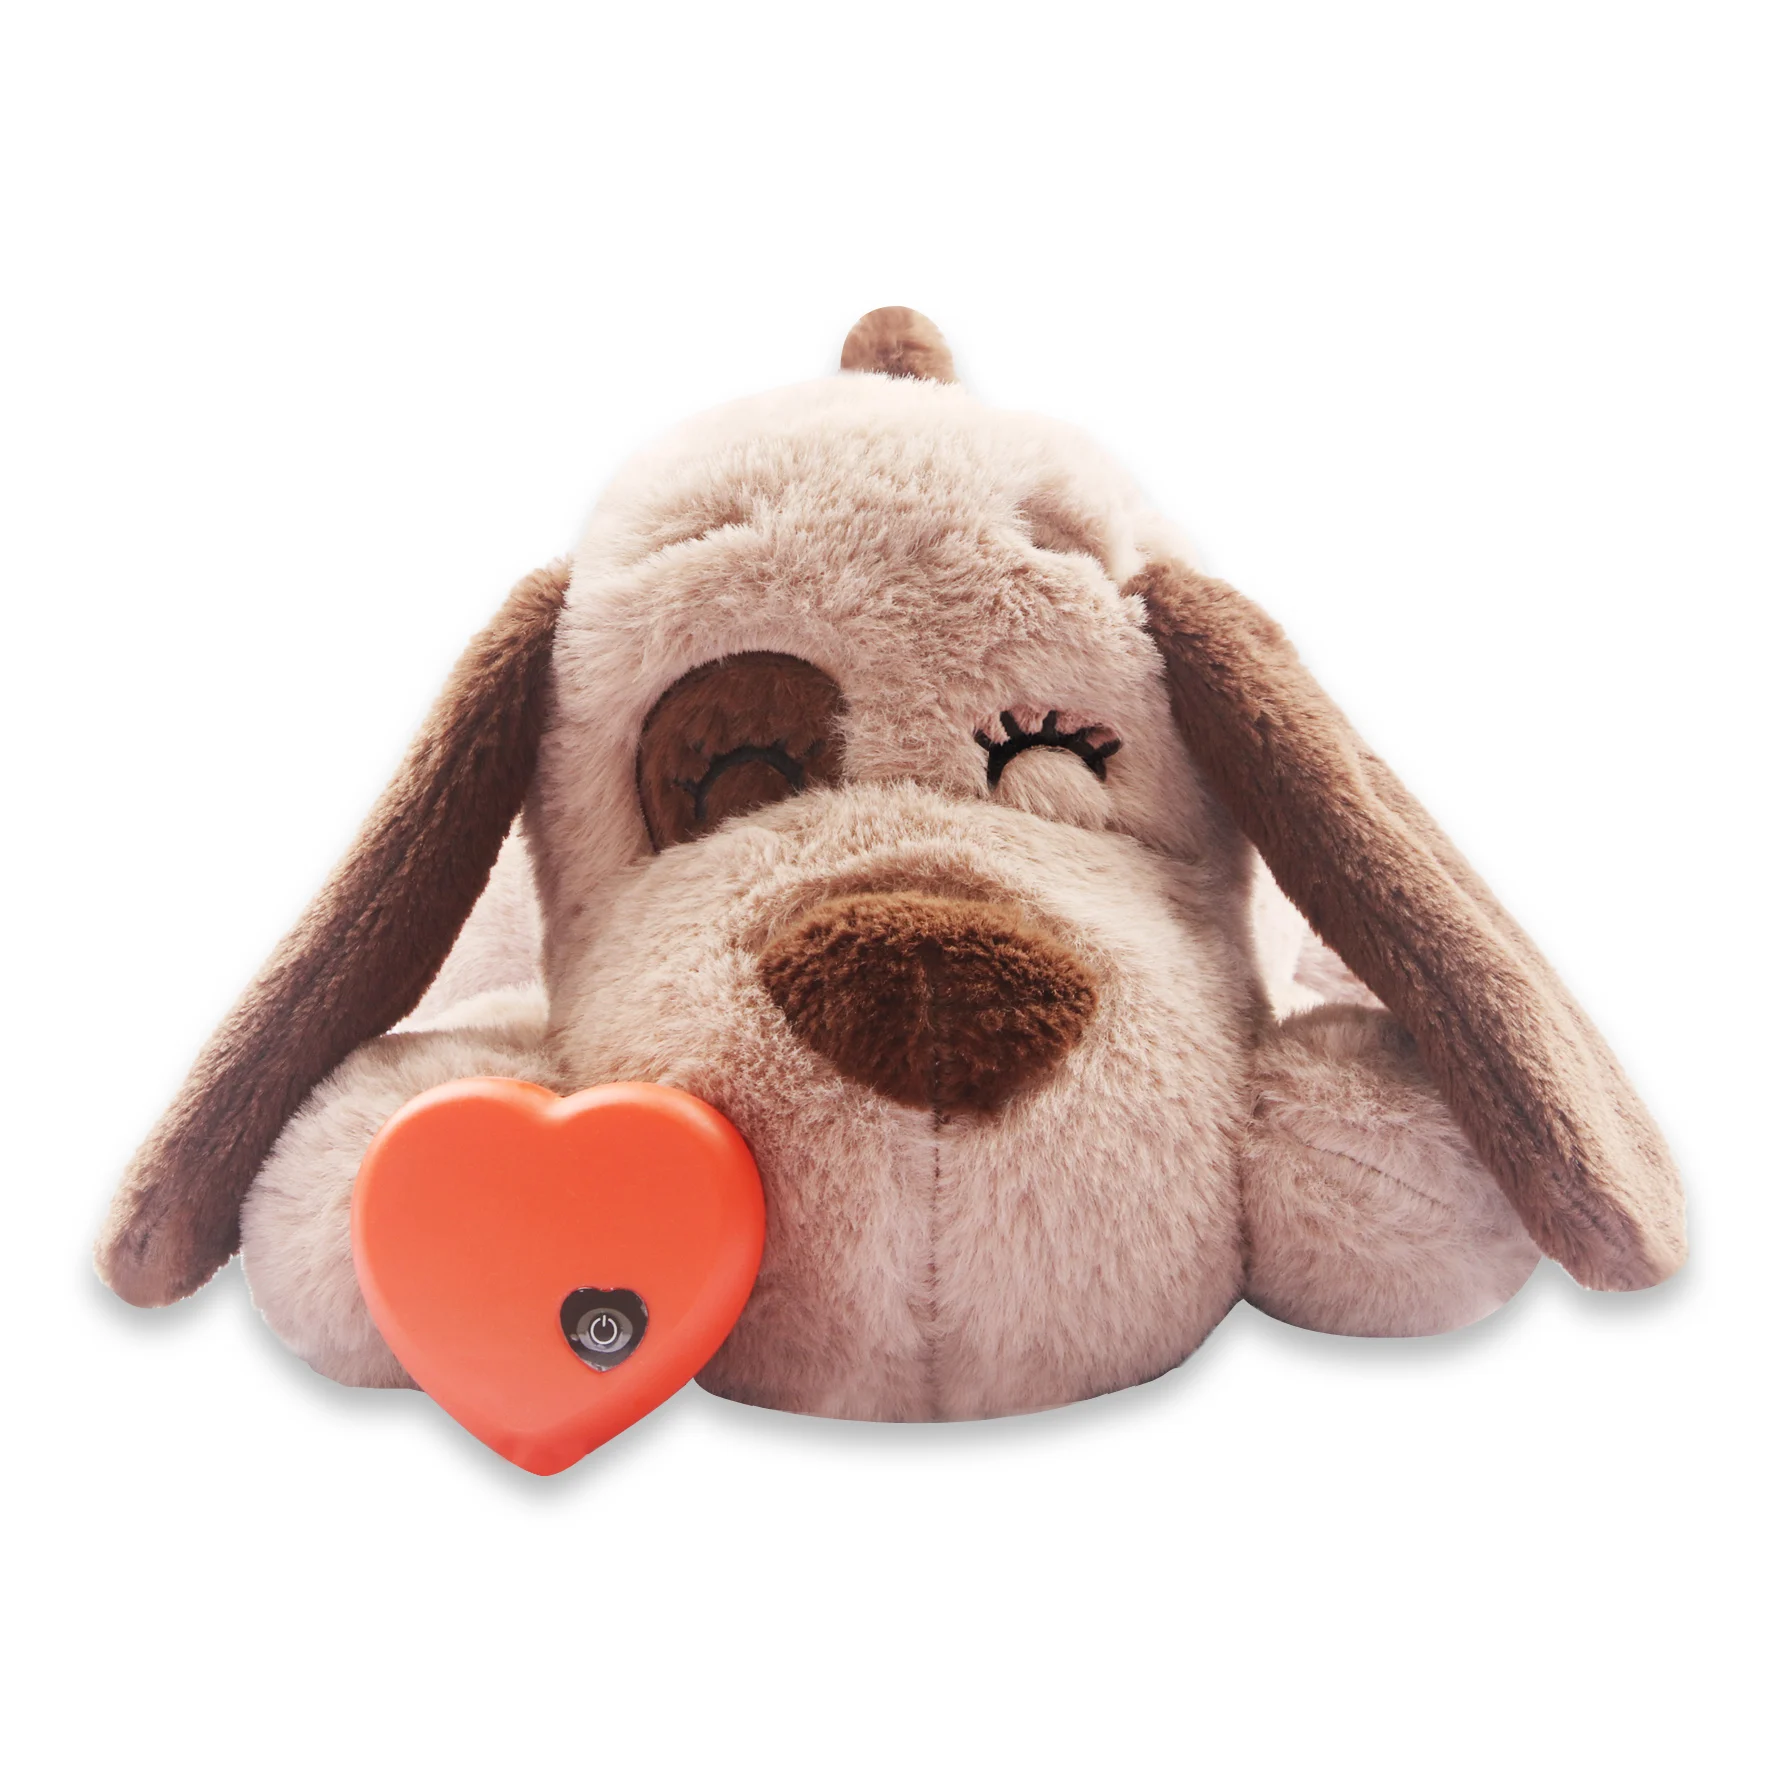 eartbeat Puppy Toy Dog Anxiety Relief Calming Aid Puppy Heartbeat Stuffed Animal Behavioral Training Sleep Aid for Dogs Cats